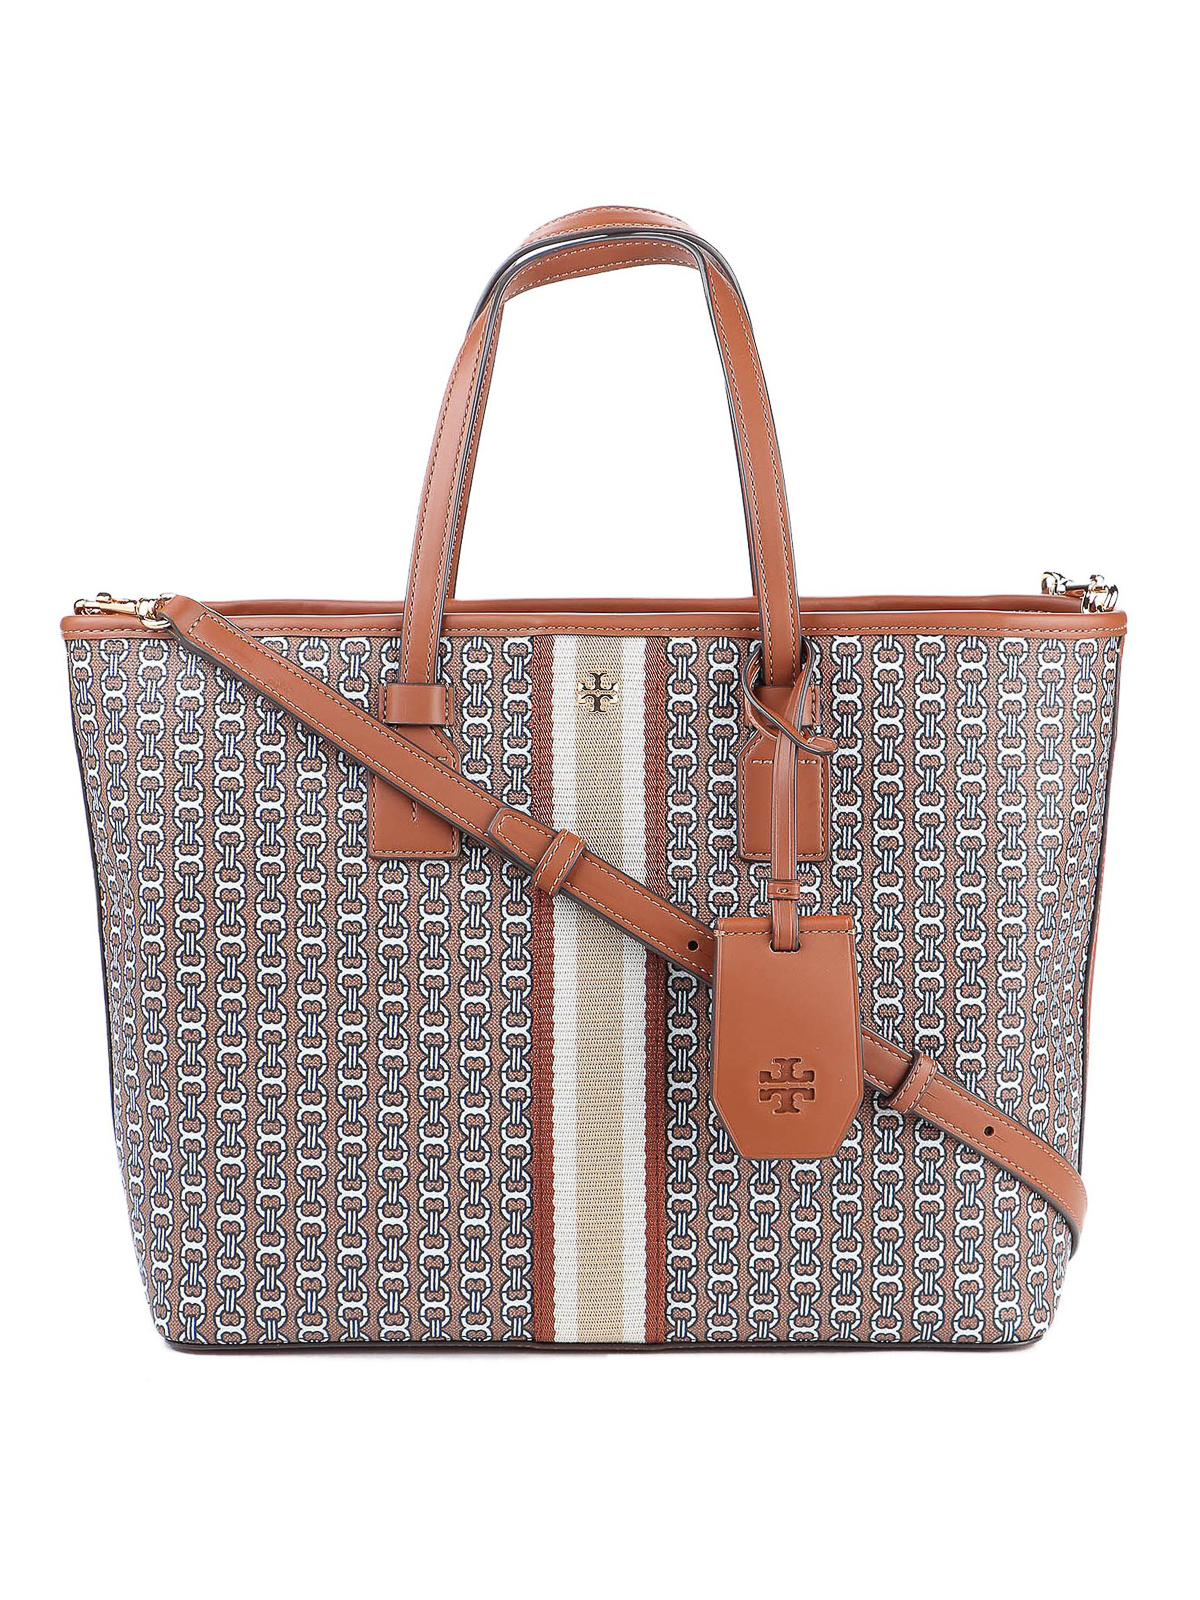 Tory Burch Gemini Link tote in textured coated canvas. 